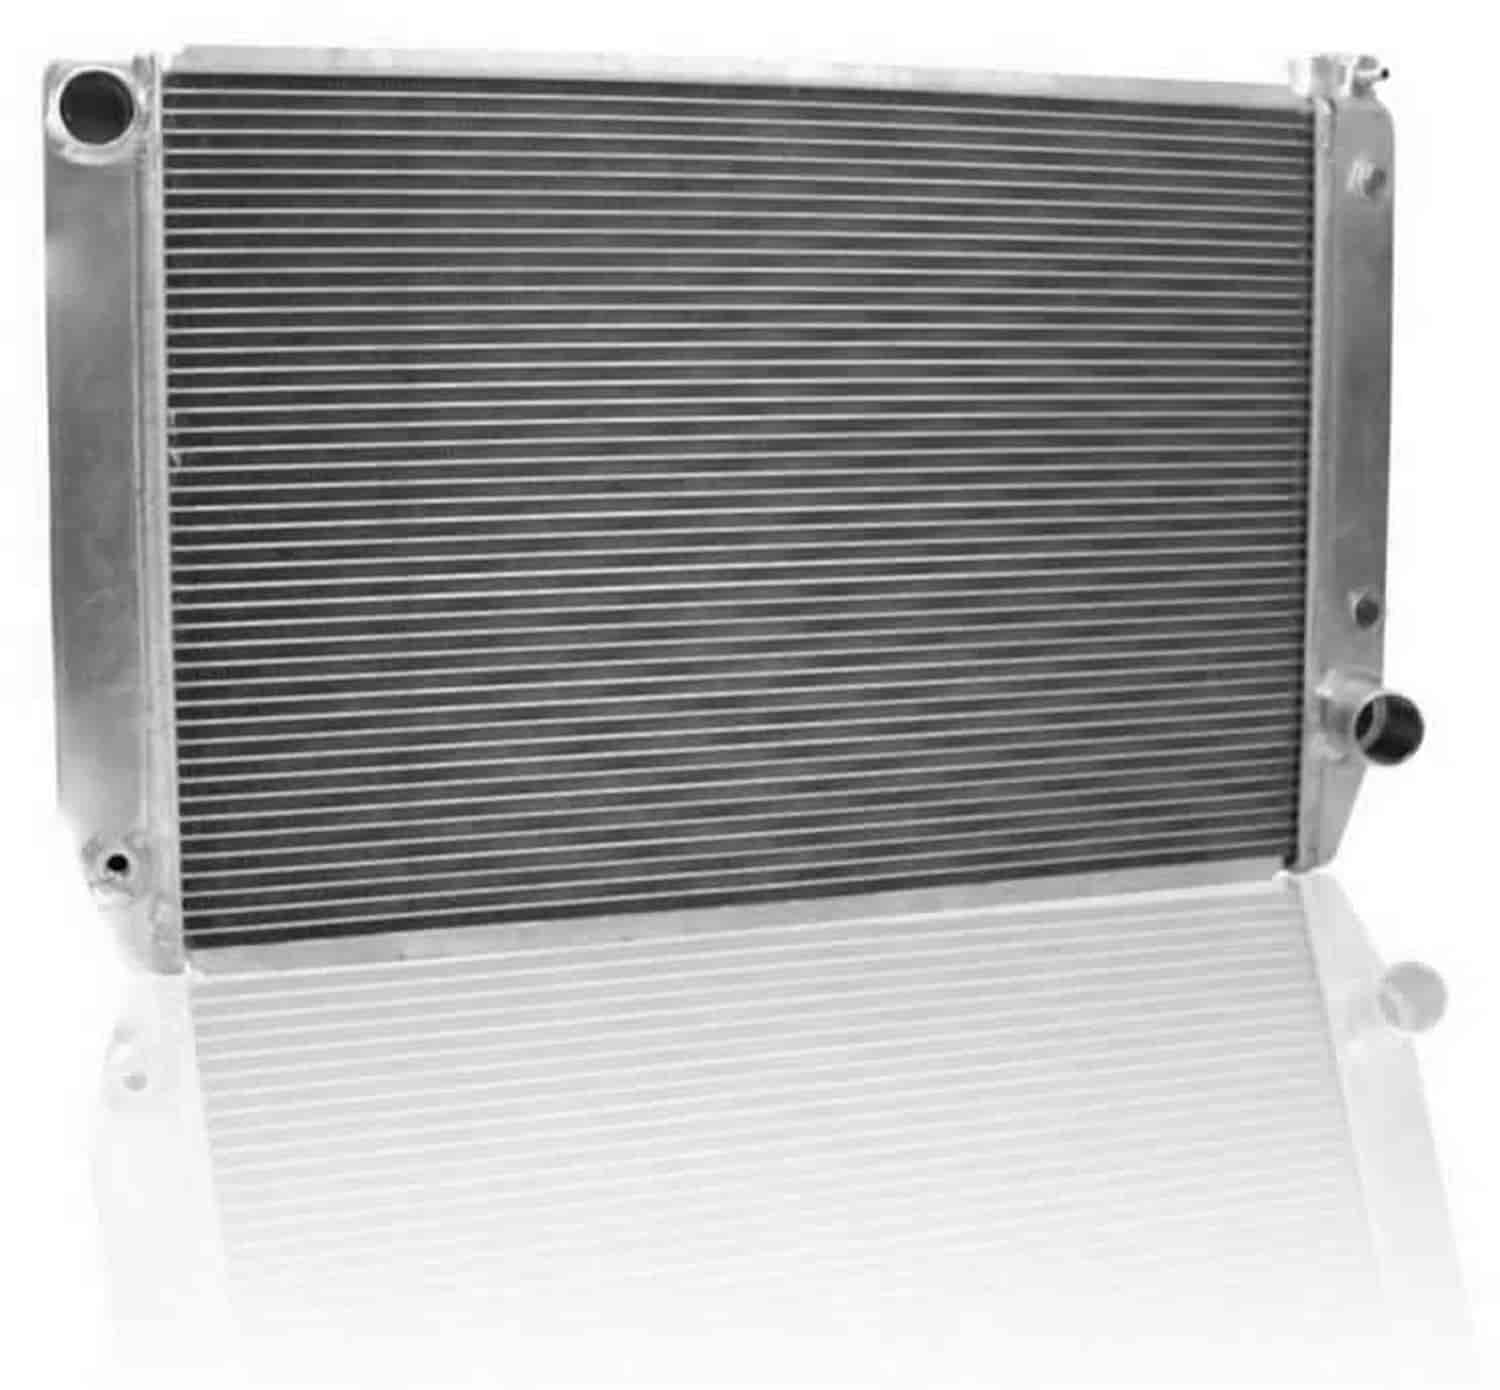 ClassicCool Universal Fit Radiator Single Pass Crossflow Design 31" x 19" with Transmission Cooler